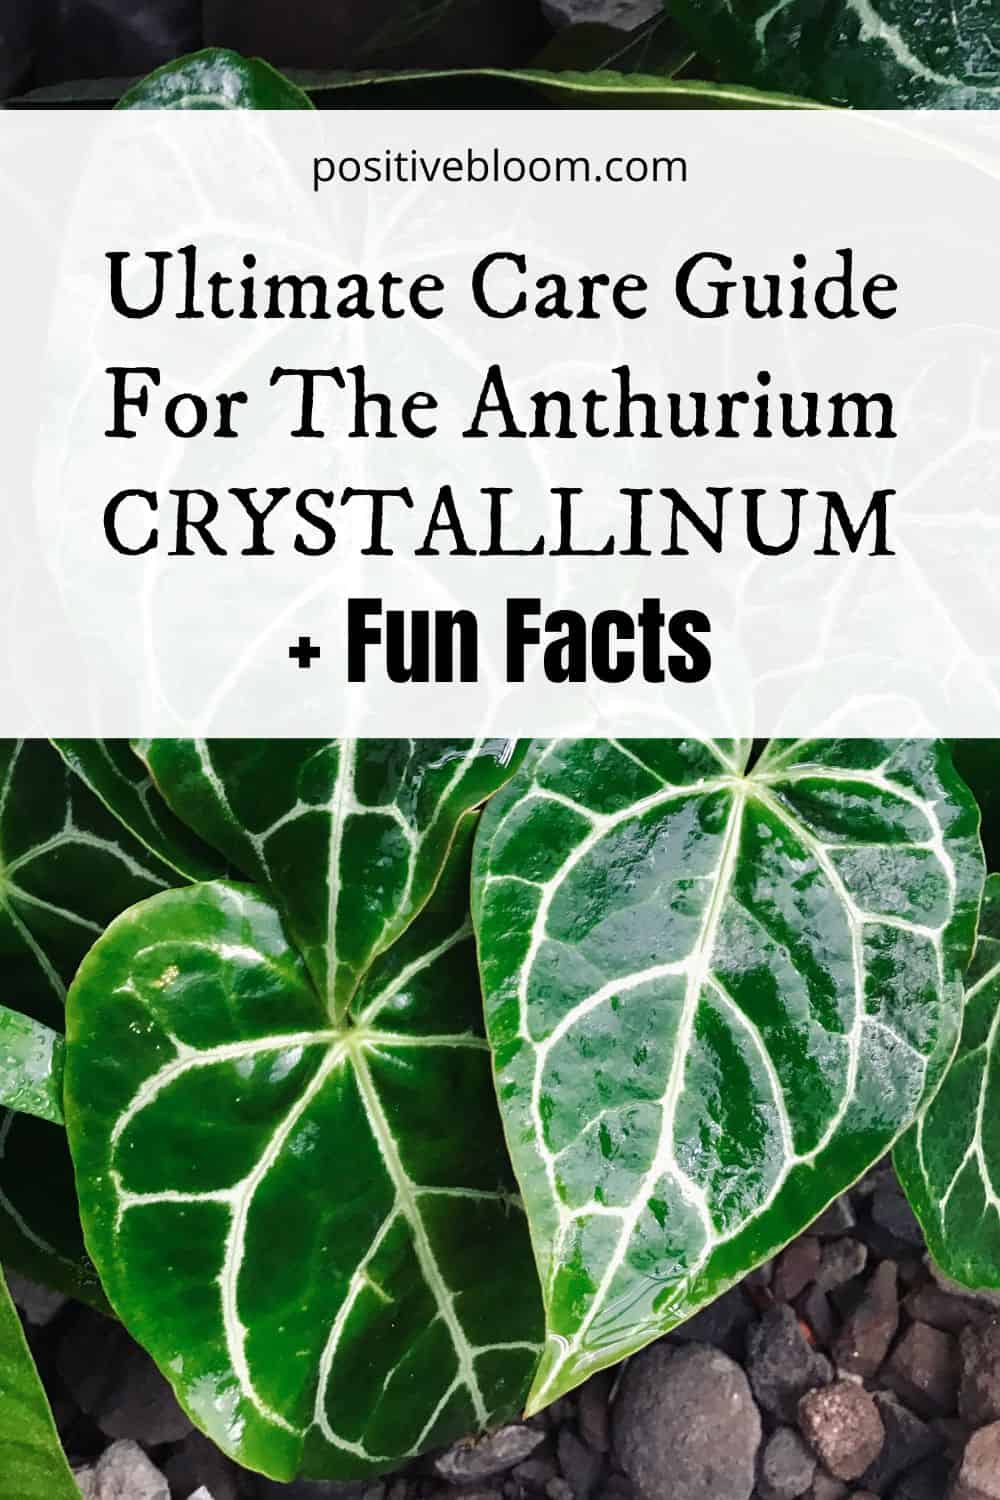 Ultimate Care Guide For The Anthurium Crystallinum + Fun Facts Pinterest